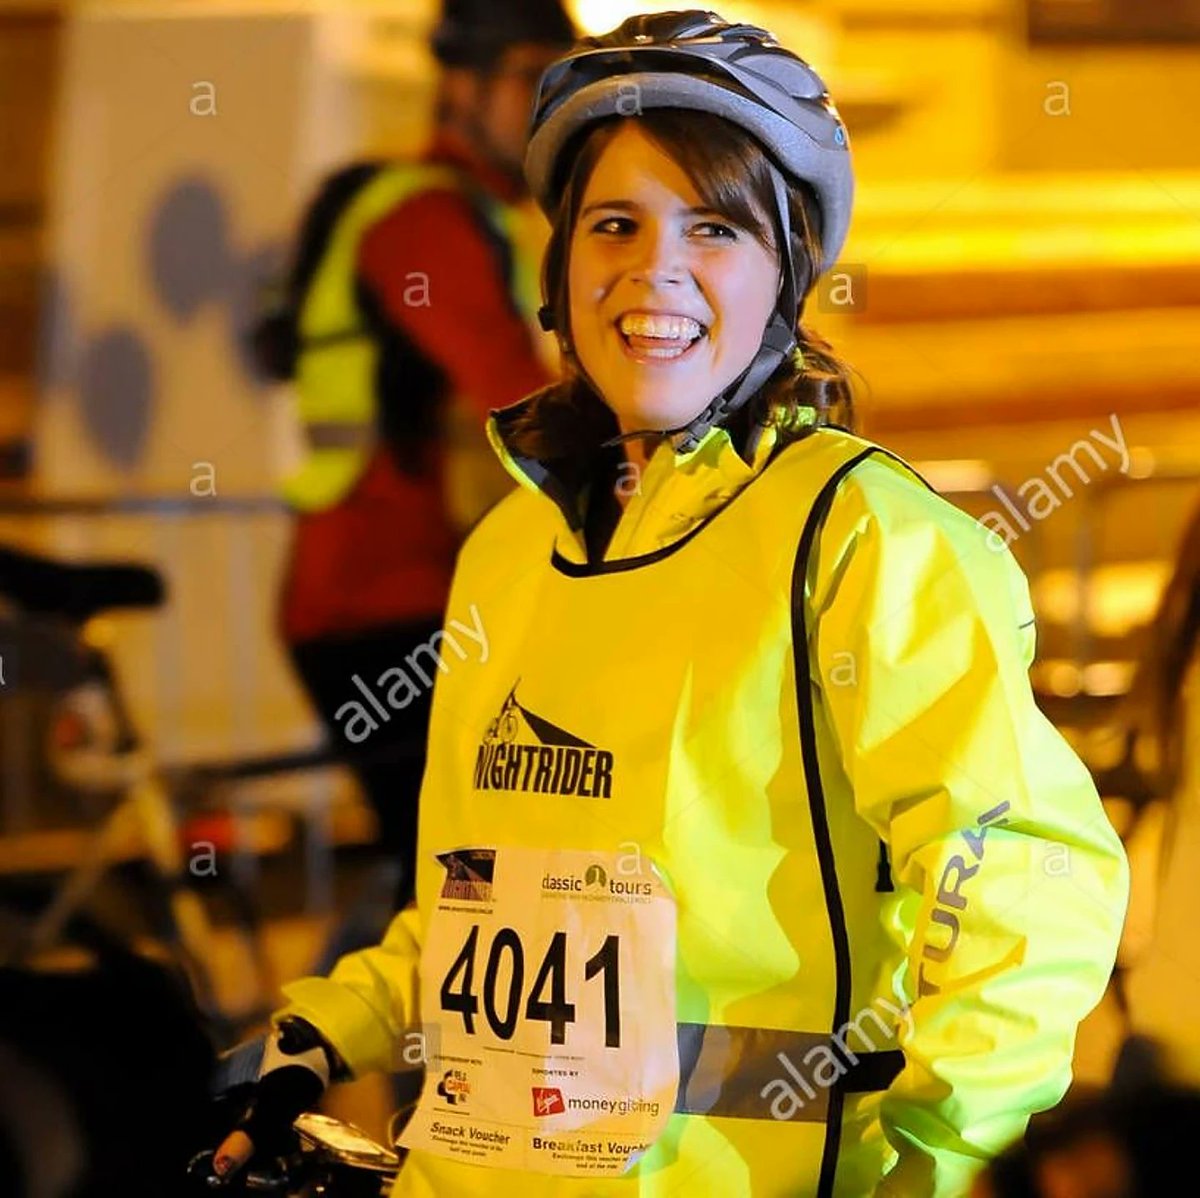 In 2011, Eugenie raised money for the RNOH by competing in the Nightrider cycling challenge.